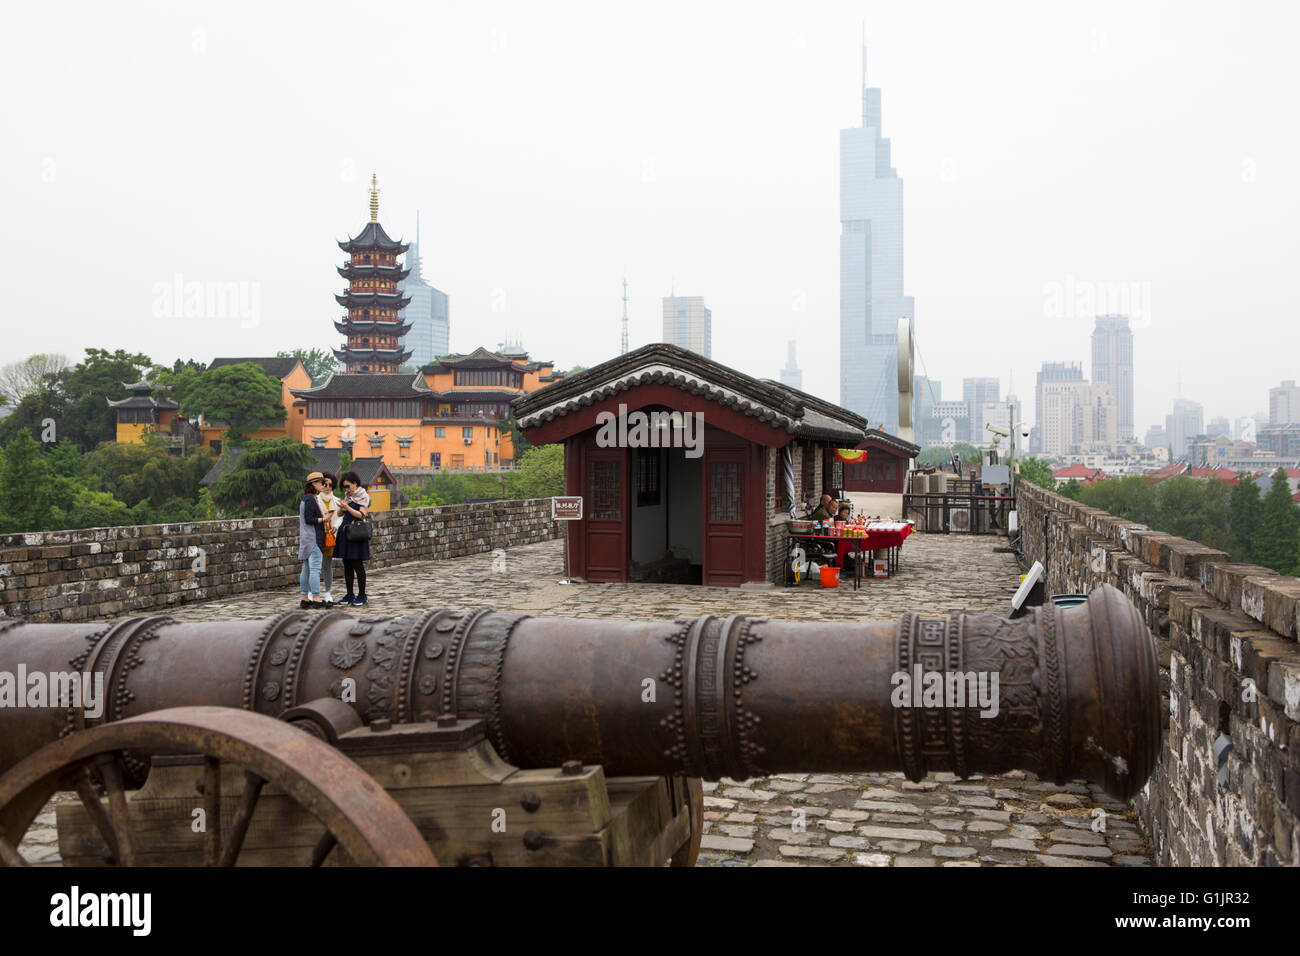 Historical city wall of Nanjing with a cannon in front, Jiming temple and skyline of Nanjing with towers in the hazy background Stock Photo